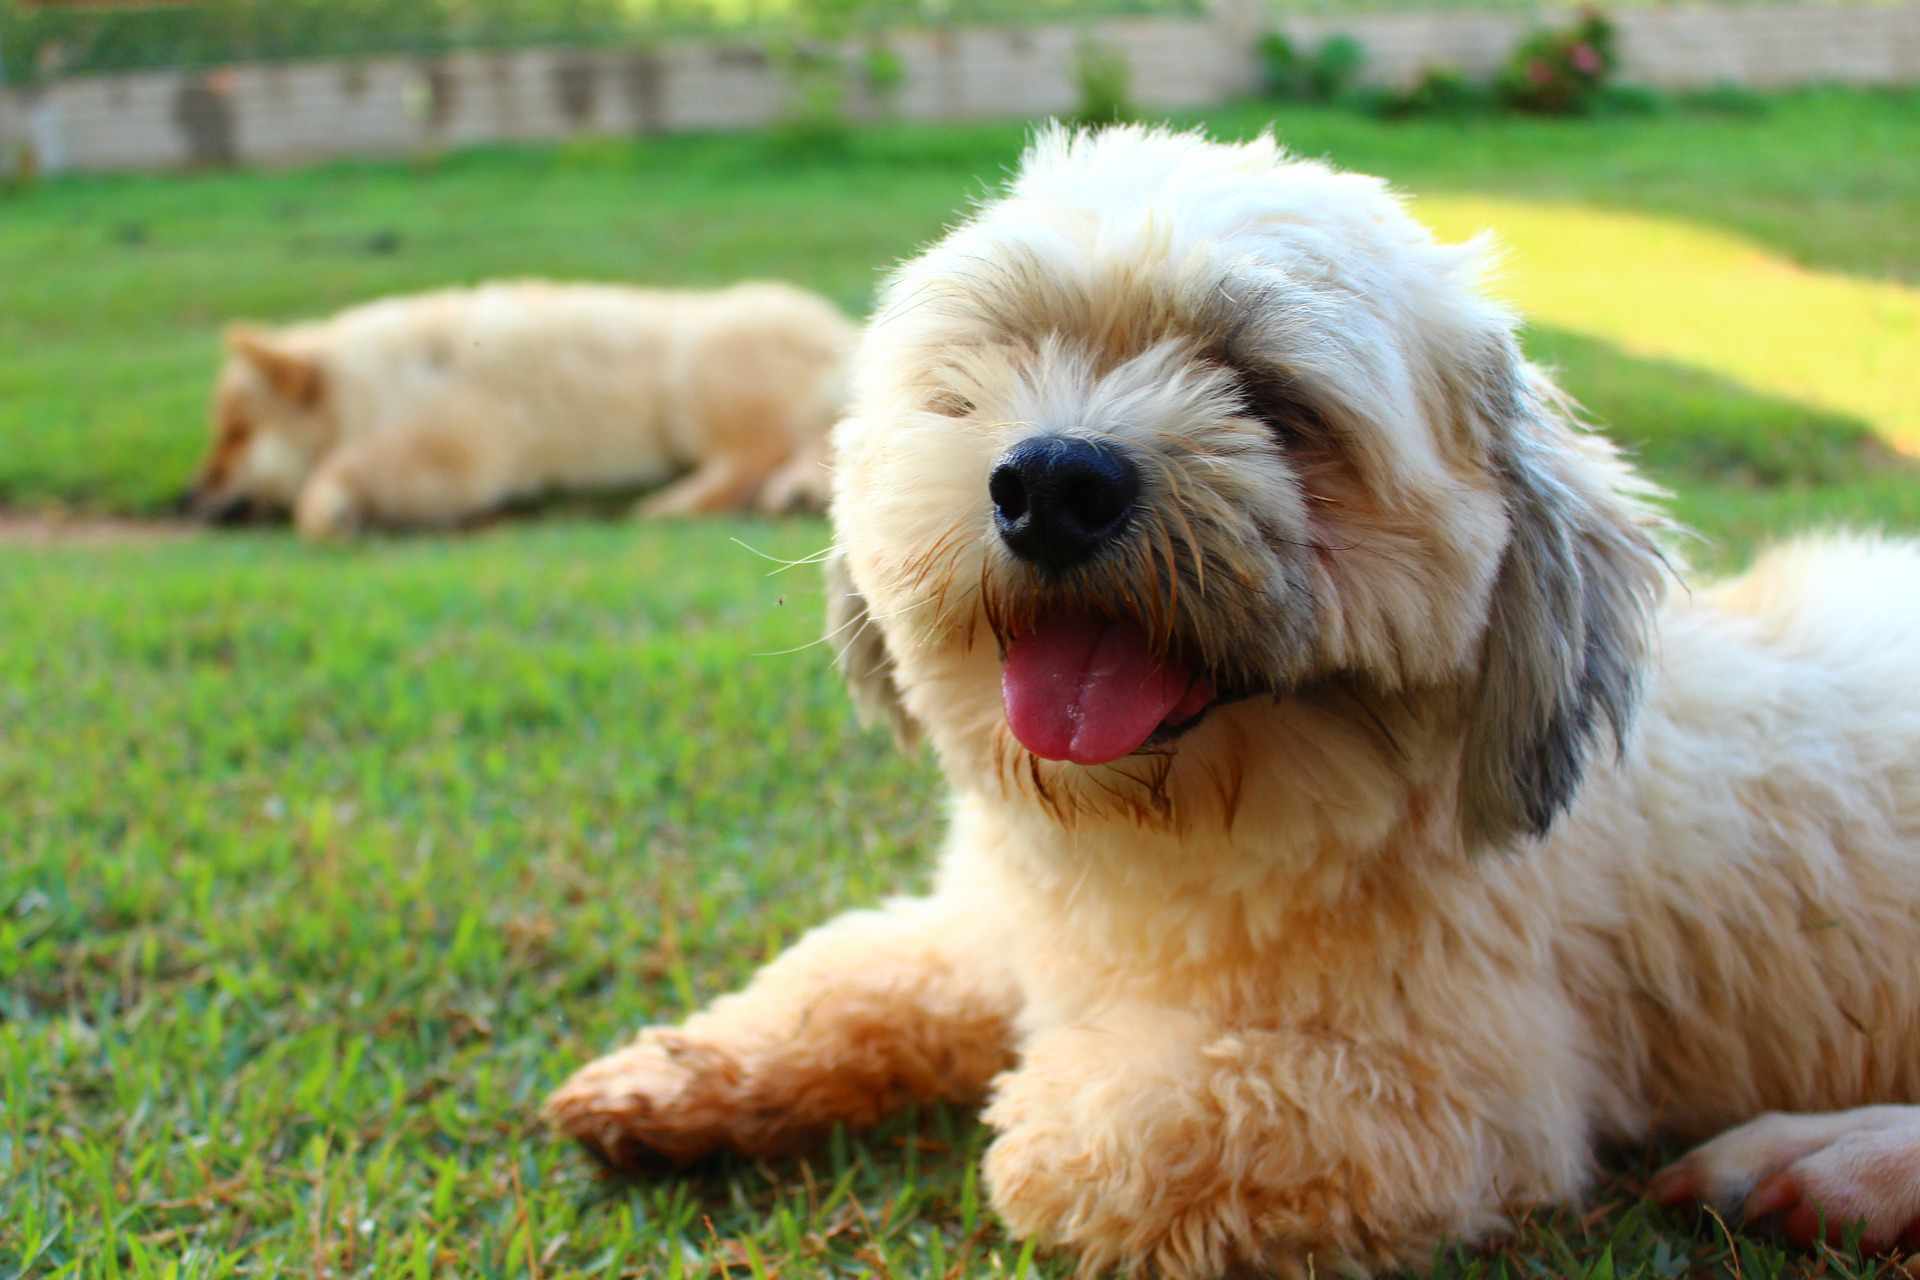 A Lhasa Apso puppy smiling for the camera.